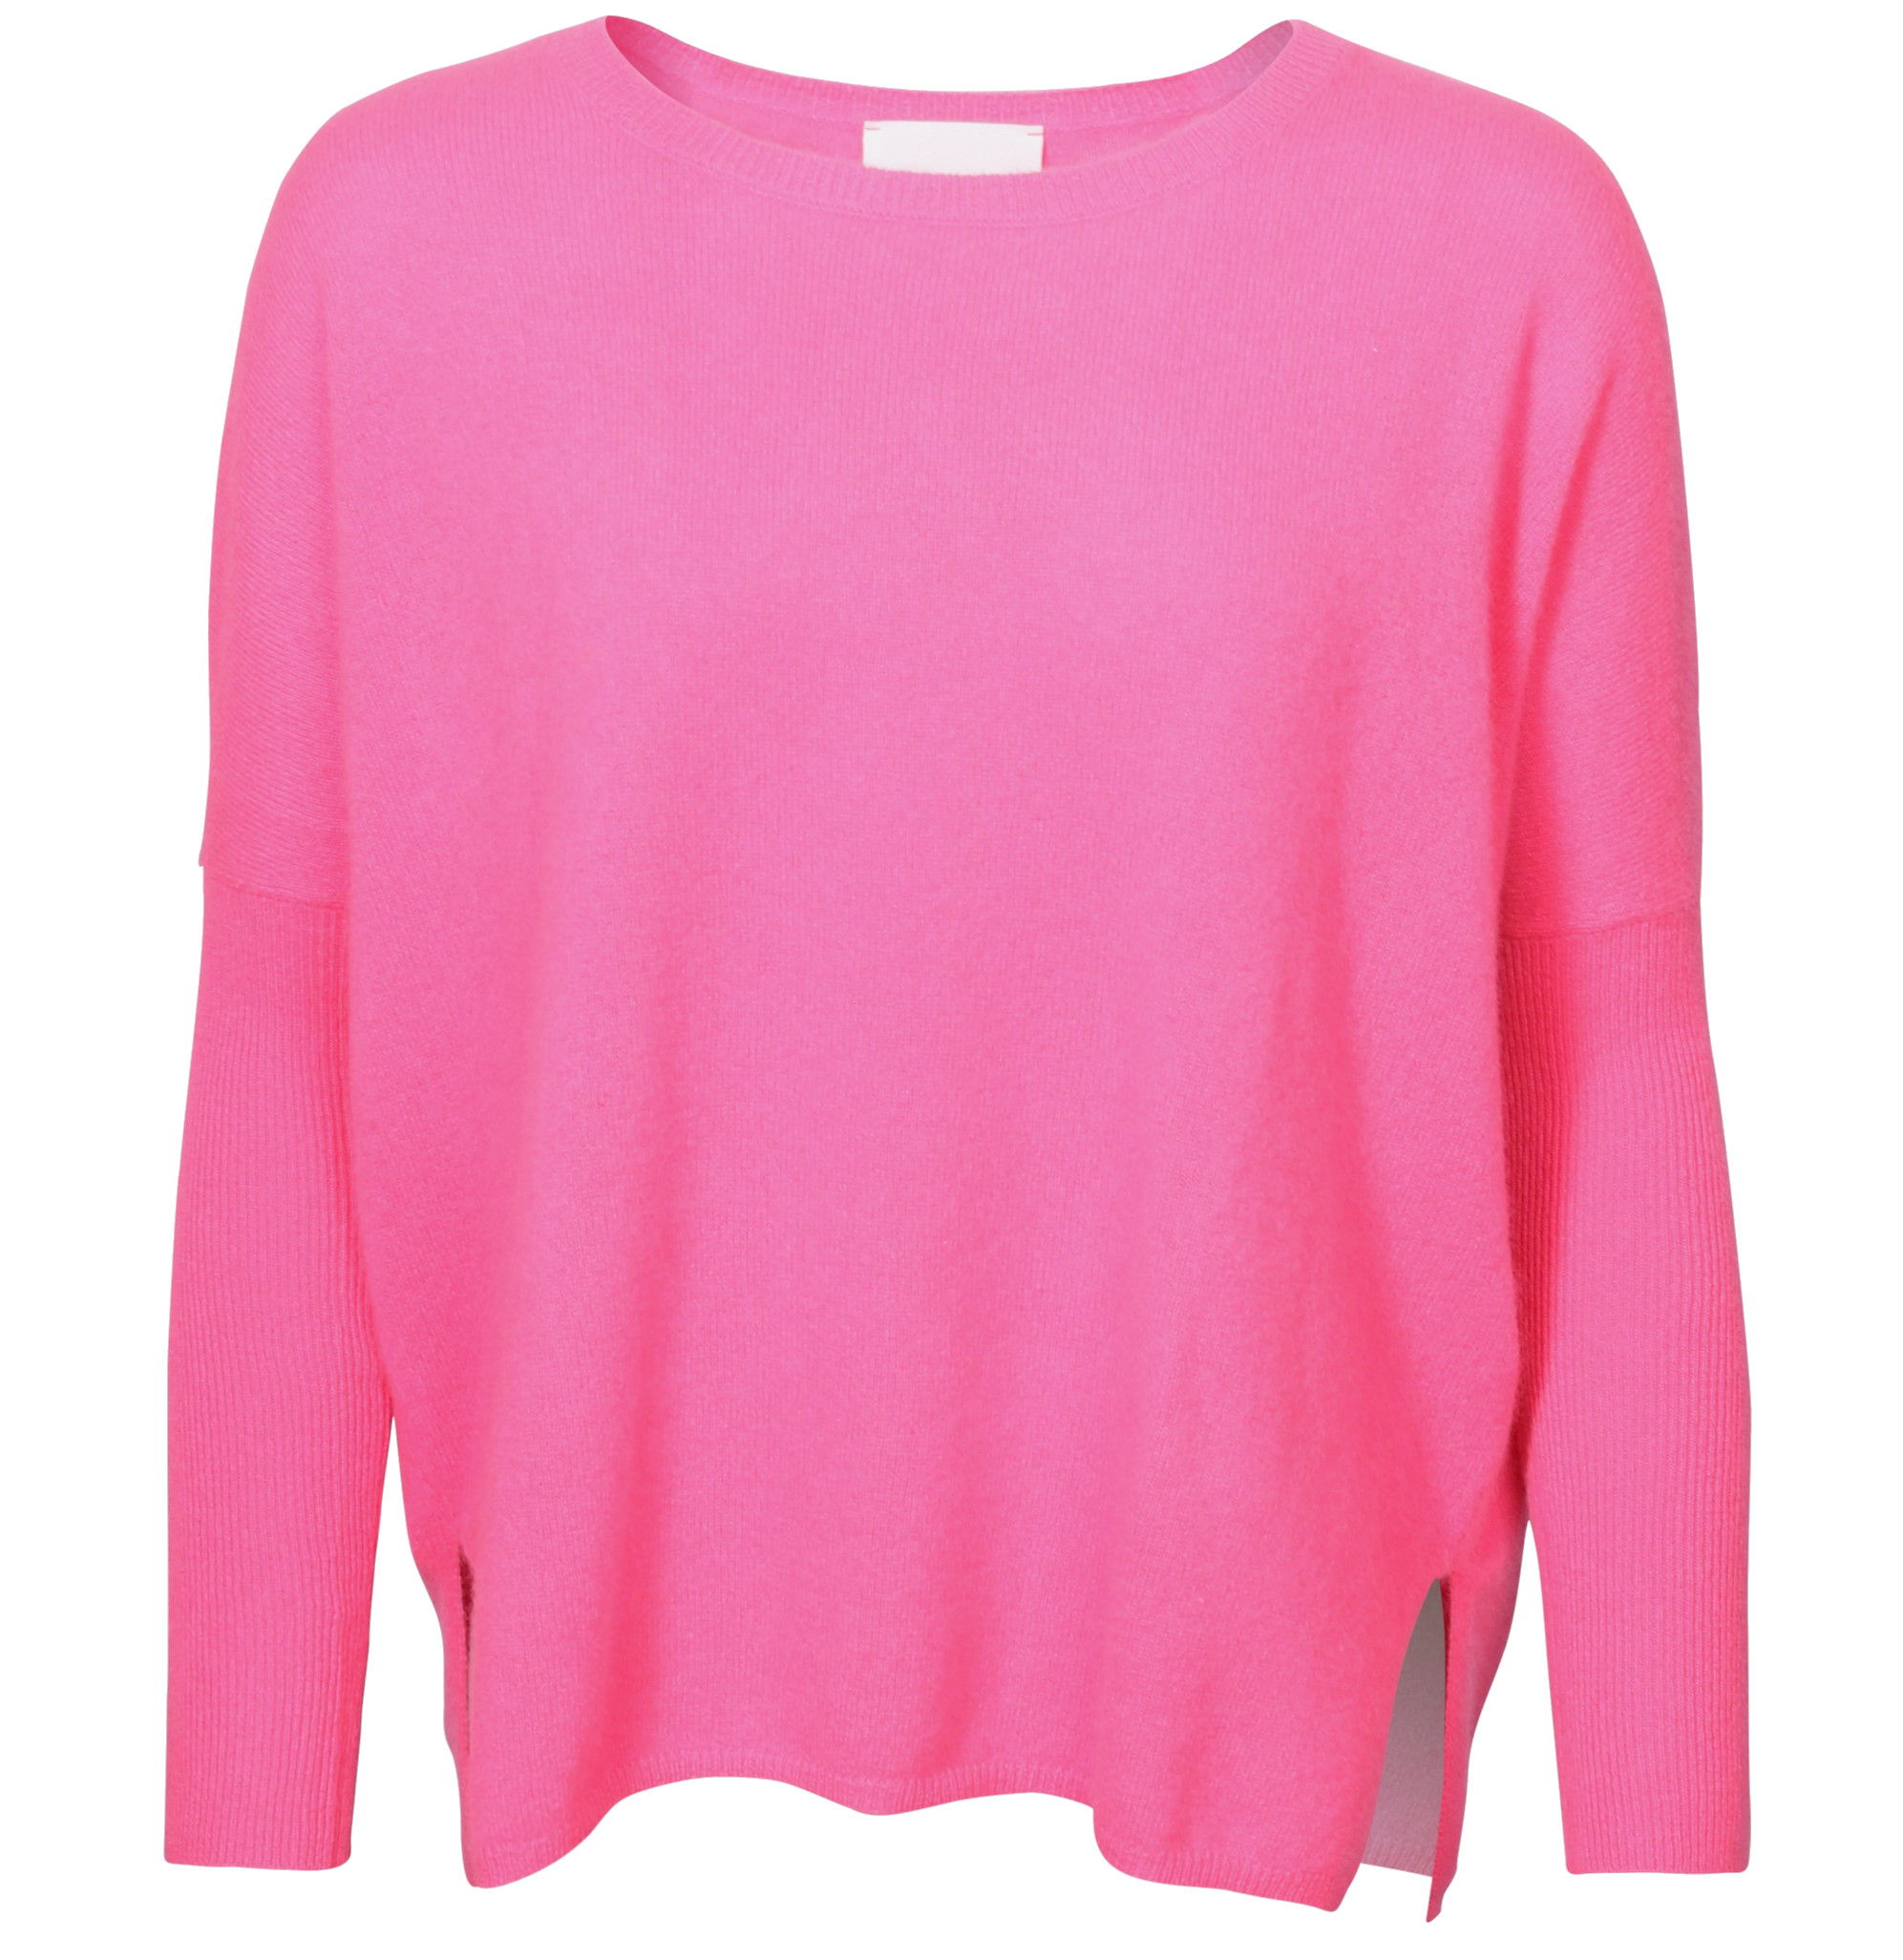 ABSOLUT CASHMERE Poncho Sweater Astrid in Fluo Pink S